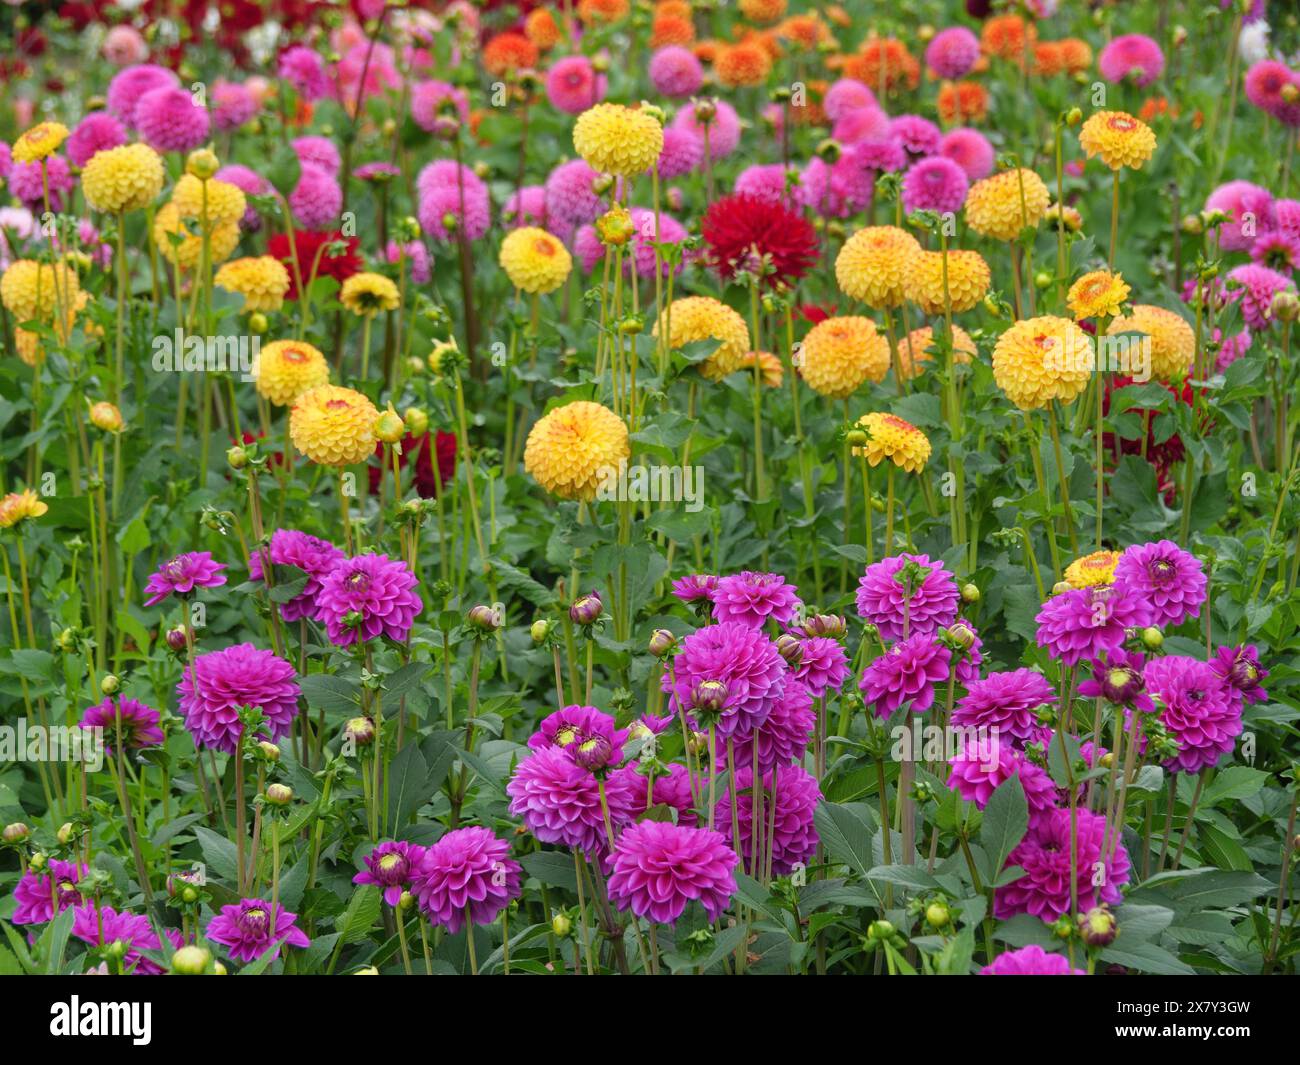 A colourful field with different dahlias in bloom, Blooming dahlias in different colours in a garden, legden, germany Stock Photo